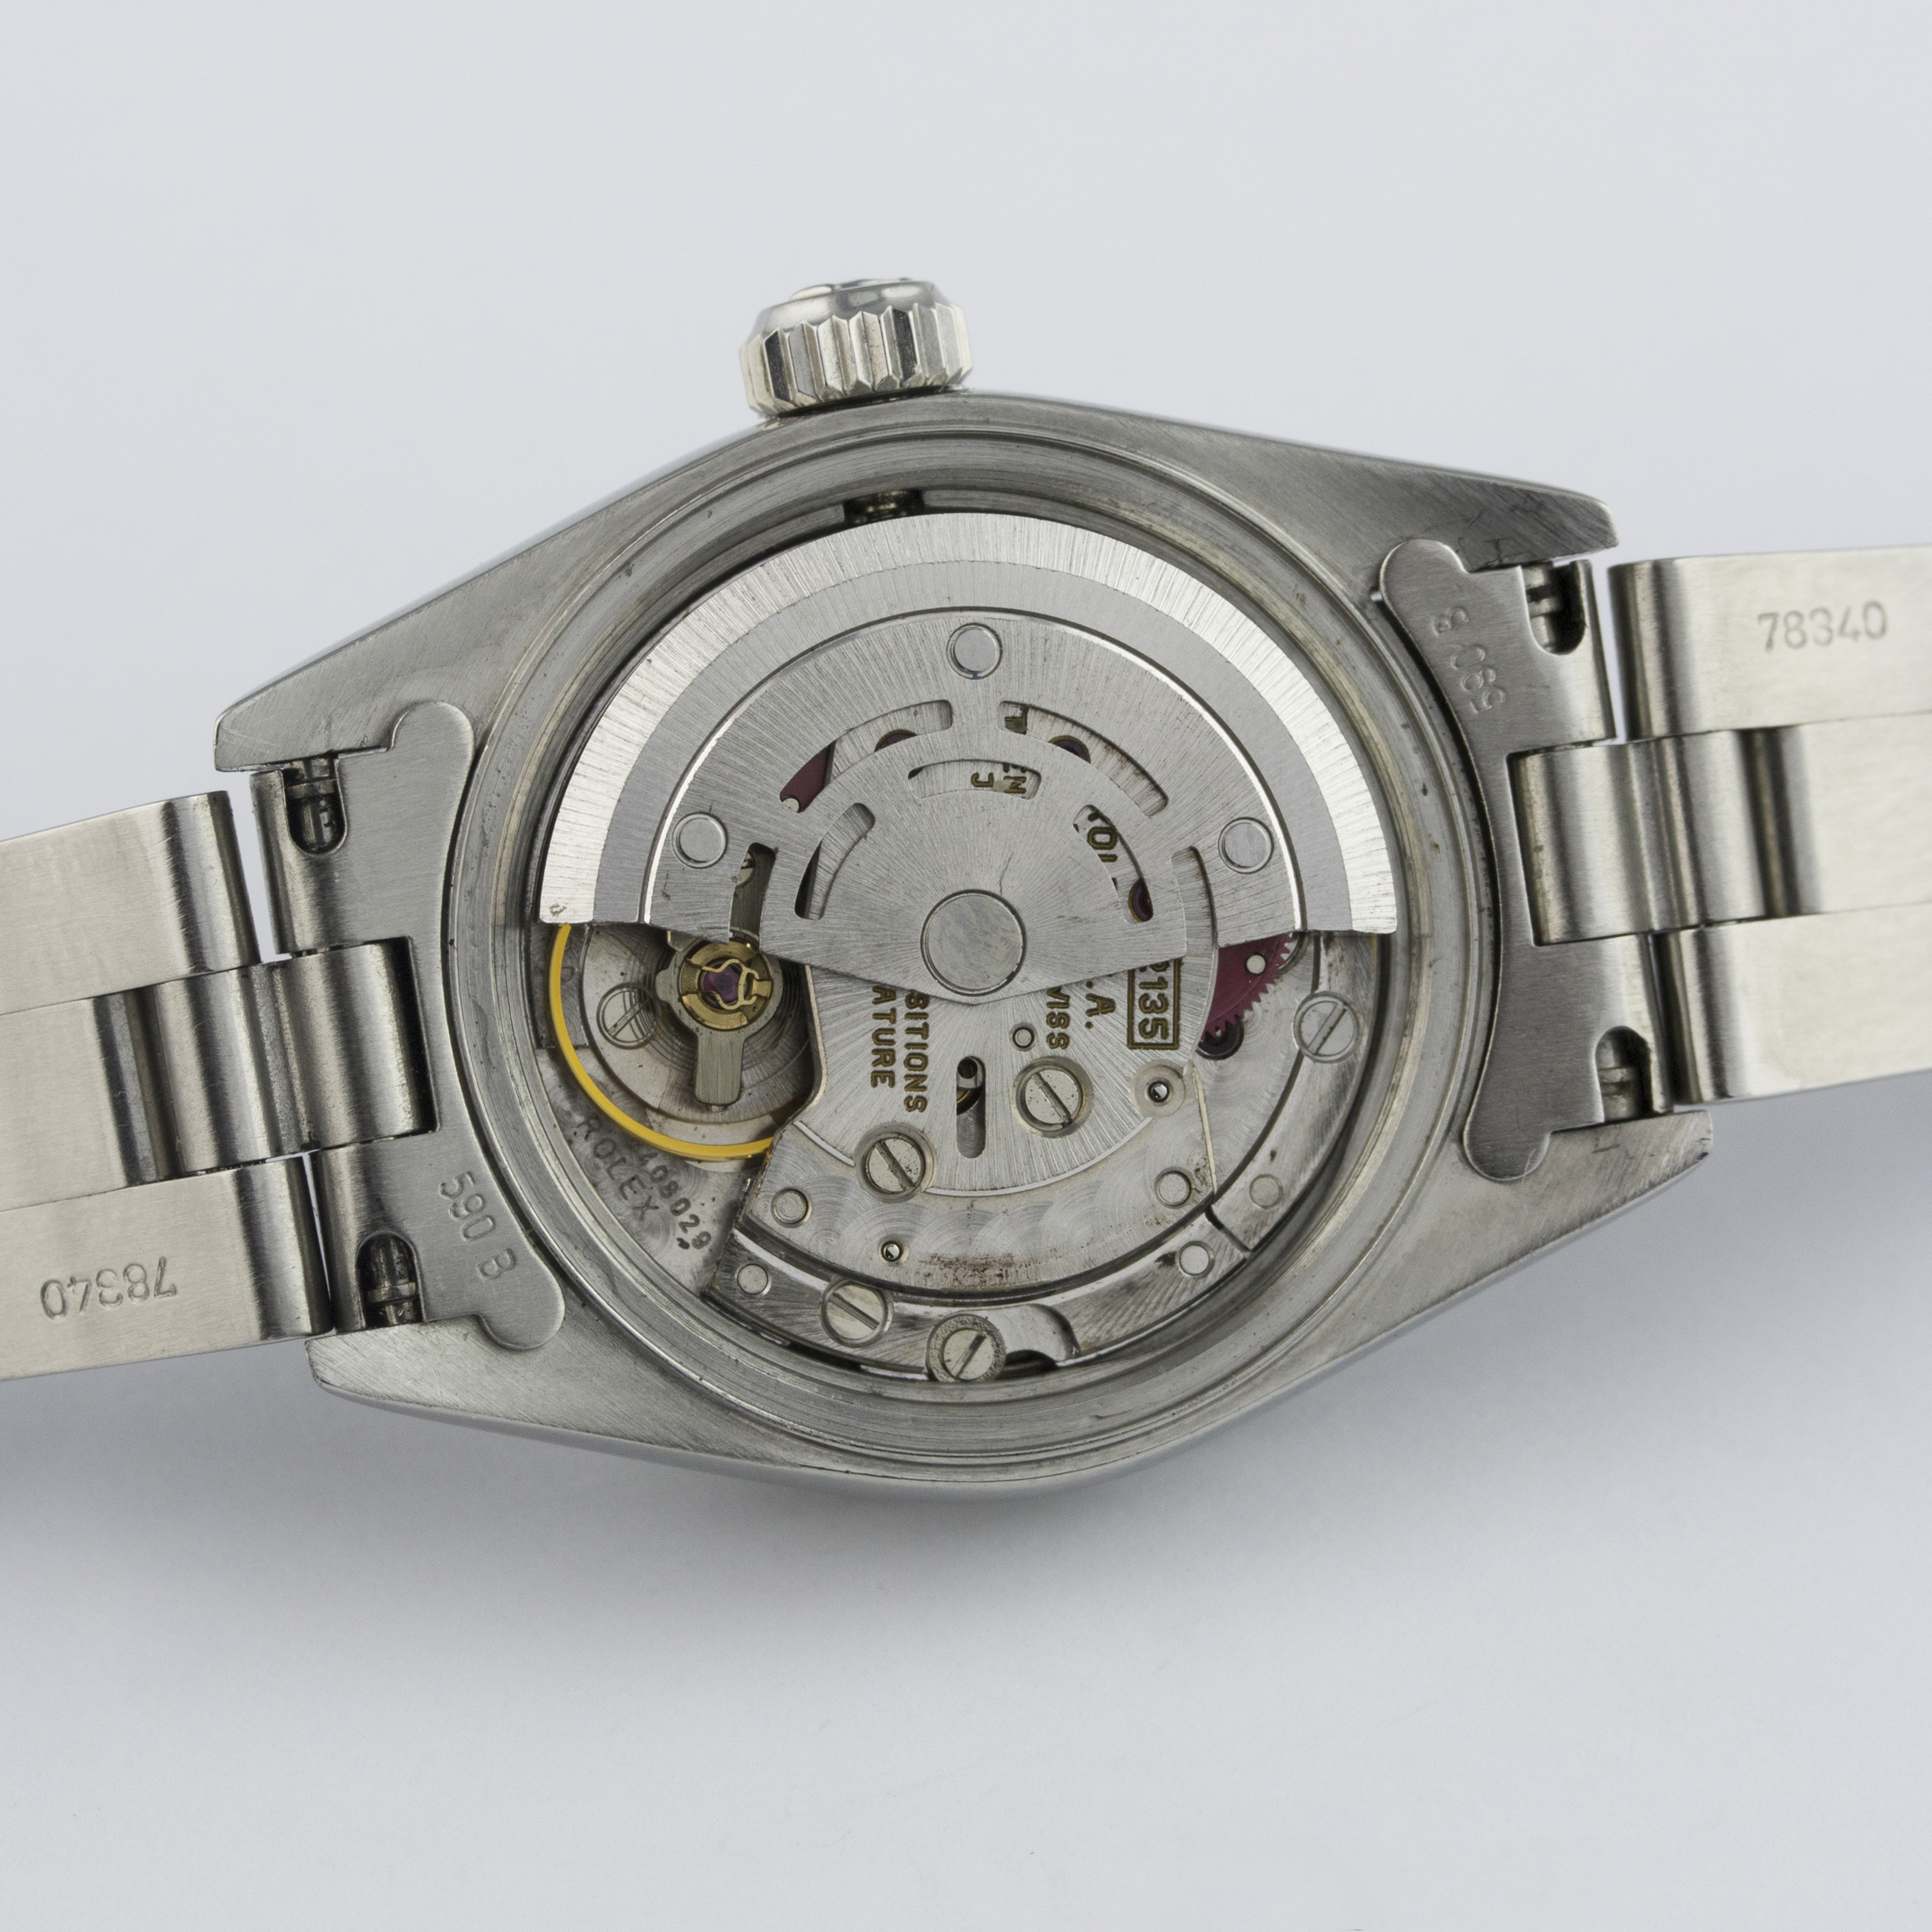 A LADIES STAINLESS STEEL ROLEX OYSTER PERPETUAL DATE BRACELET WATCH CIRCA 1993, REF. 69160 D: Silver - Image 8 of 9